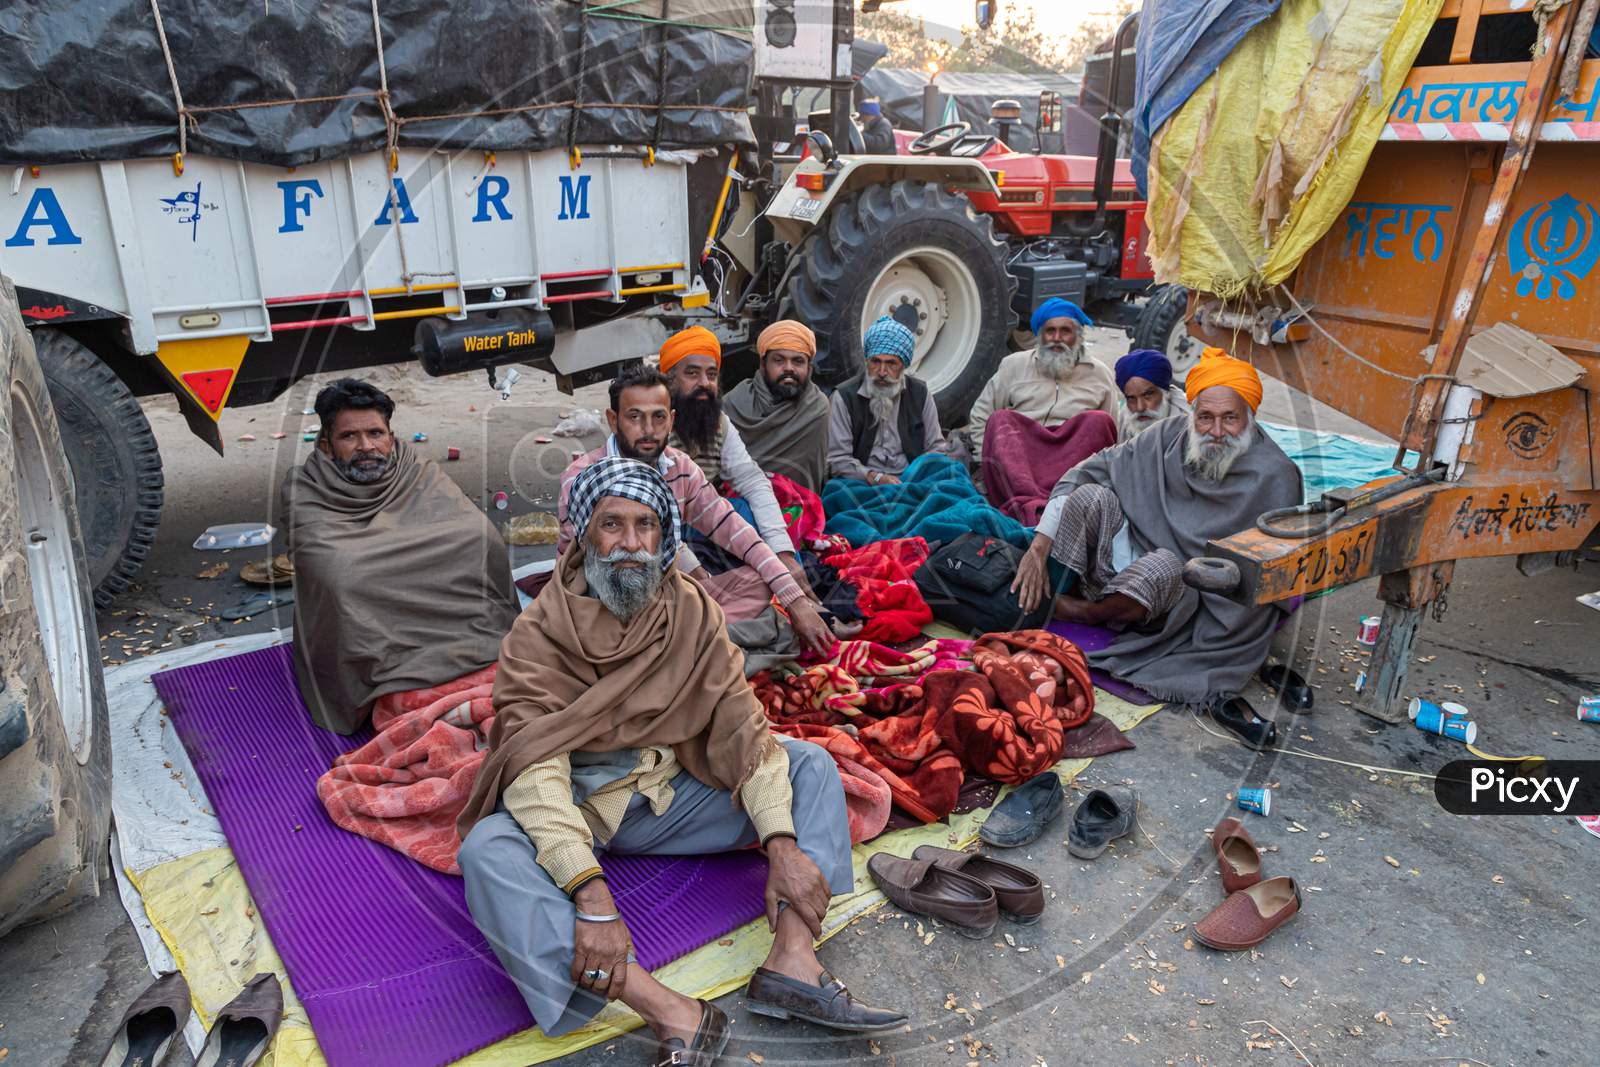 Farmers Are Protesting Against The New Farm Law In India.